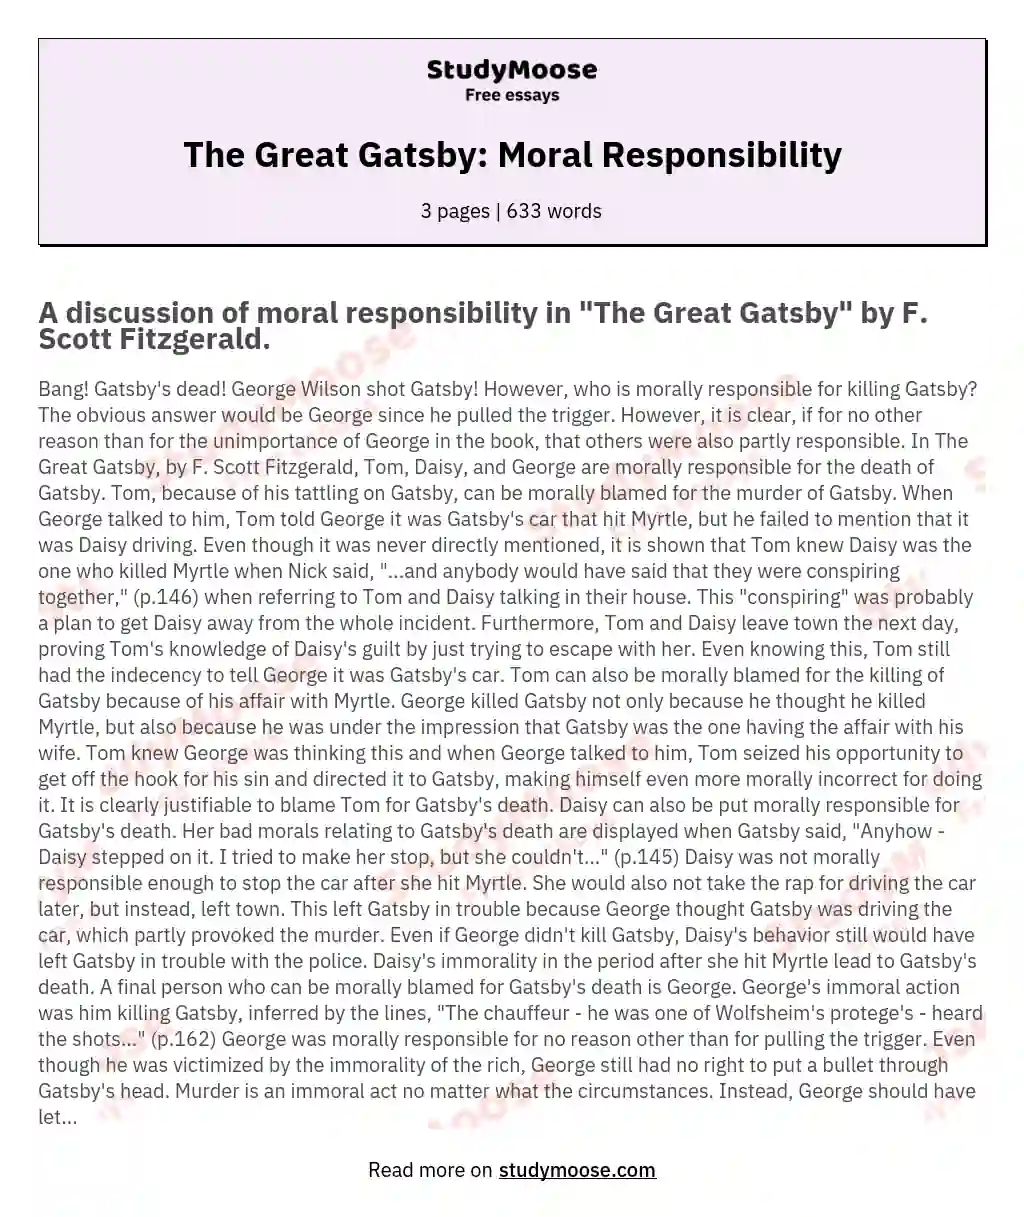 The Great Gatsby: Moral Responsibility